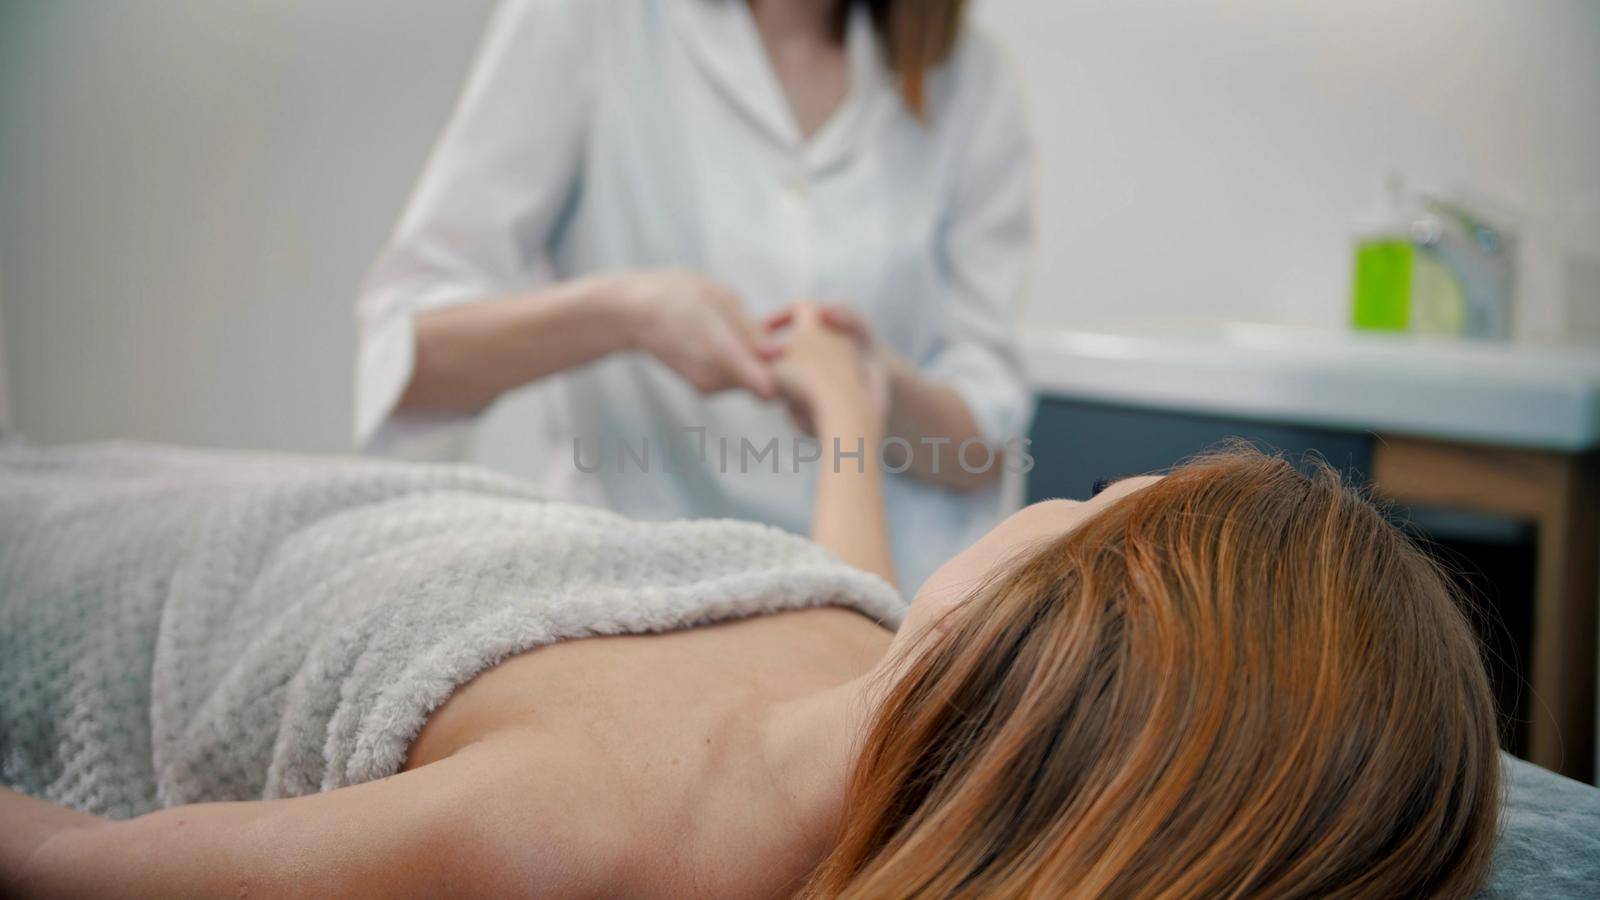 Female young massage therapist massaging hands of woman client - indoor